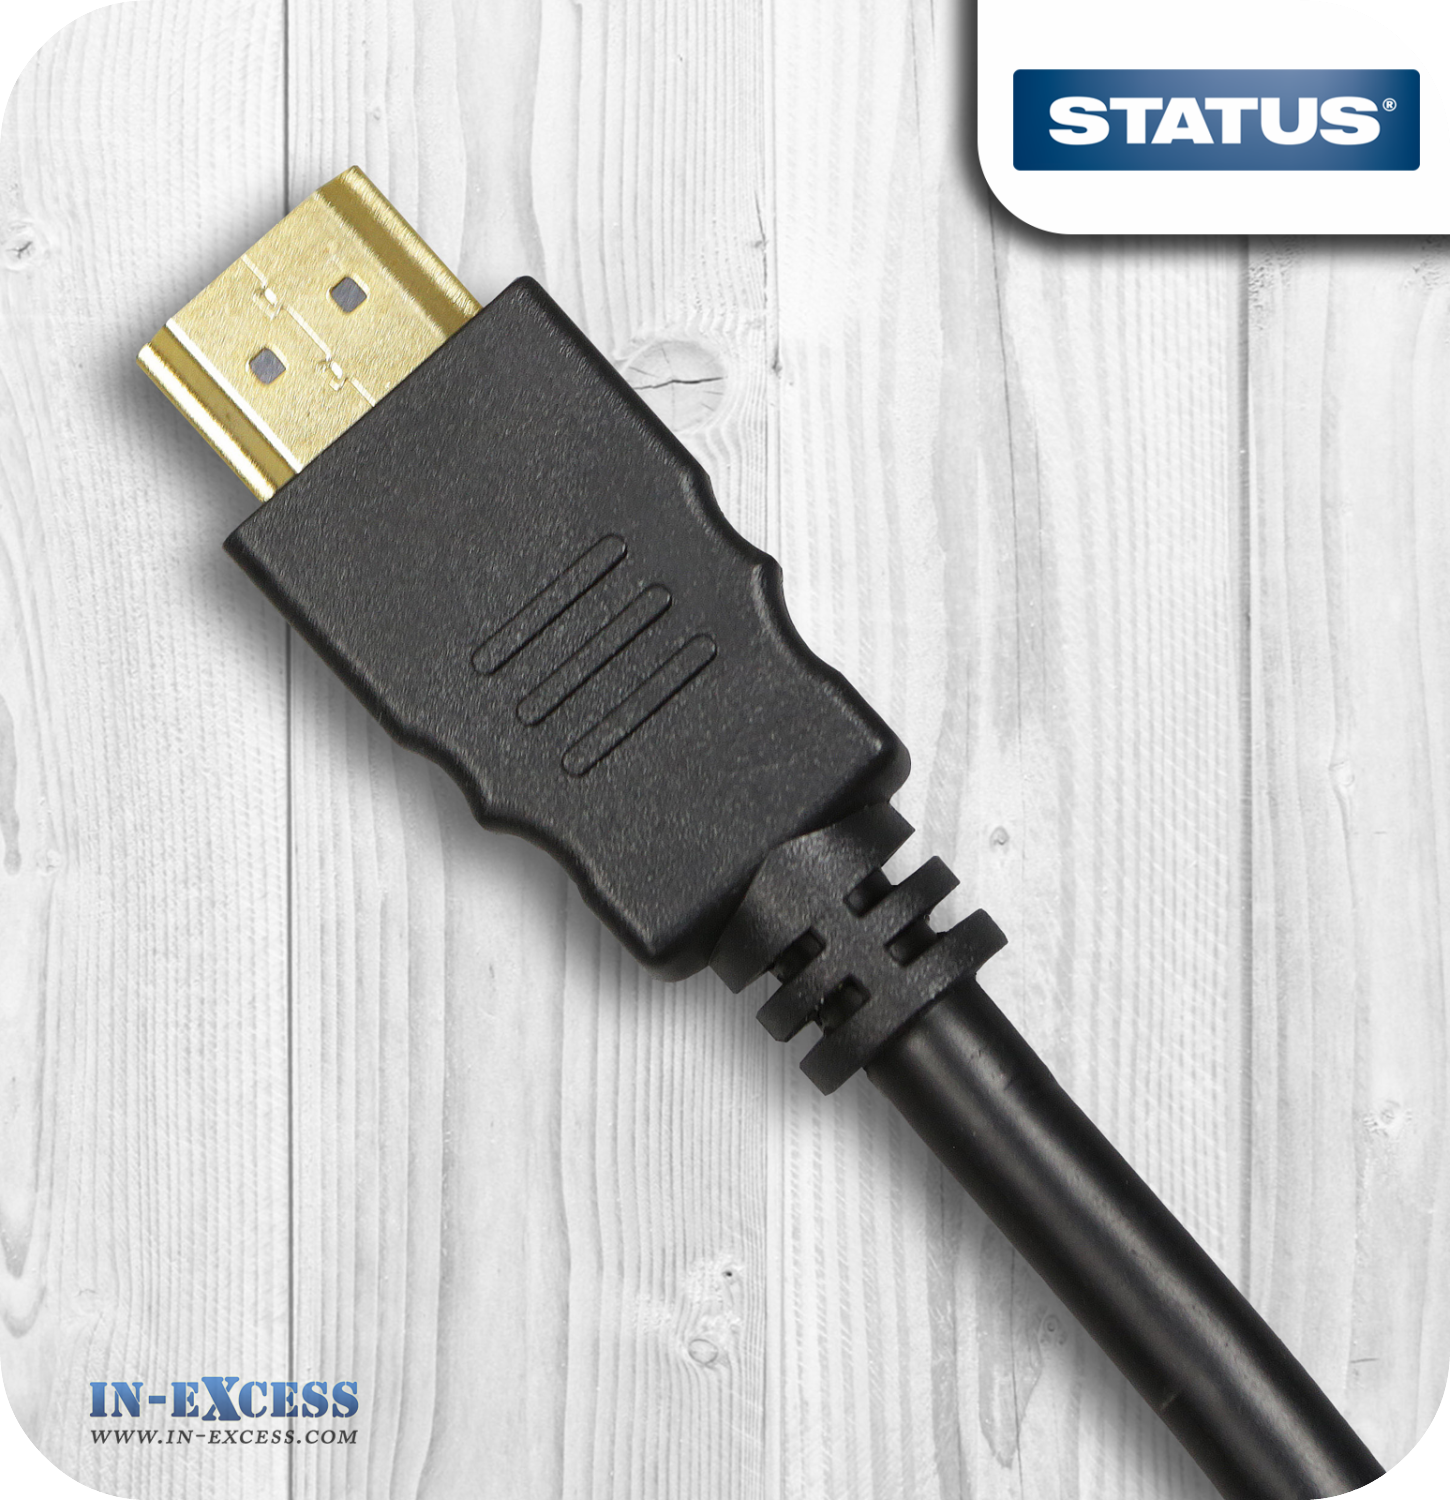 Status Gold HDMI Lead - 2 Metre Cable